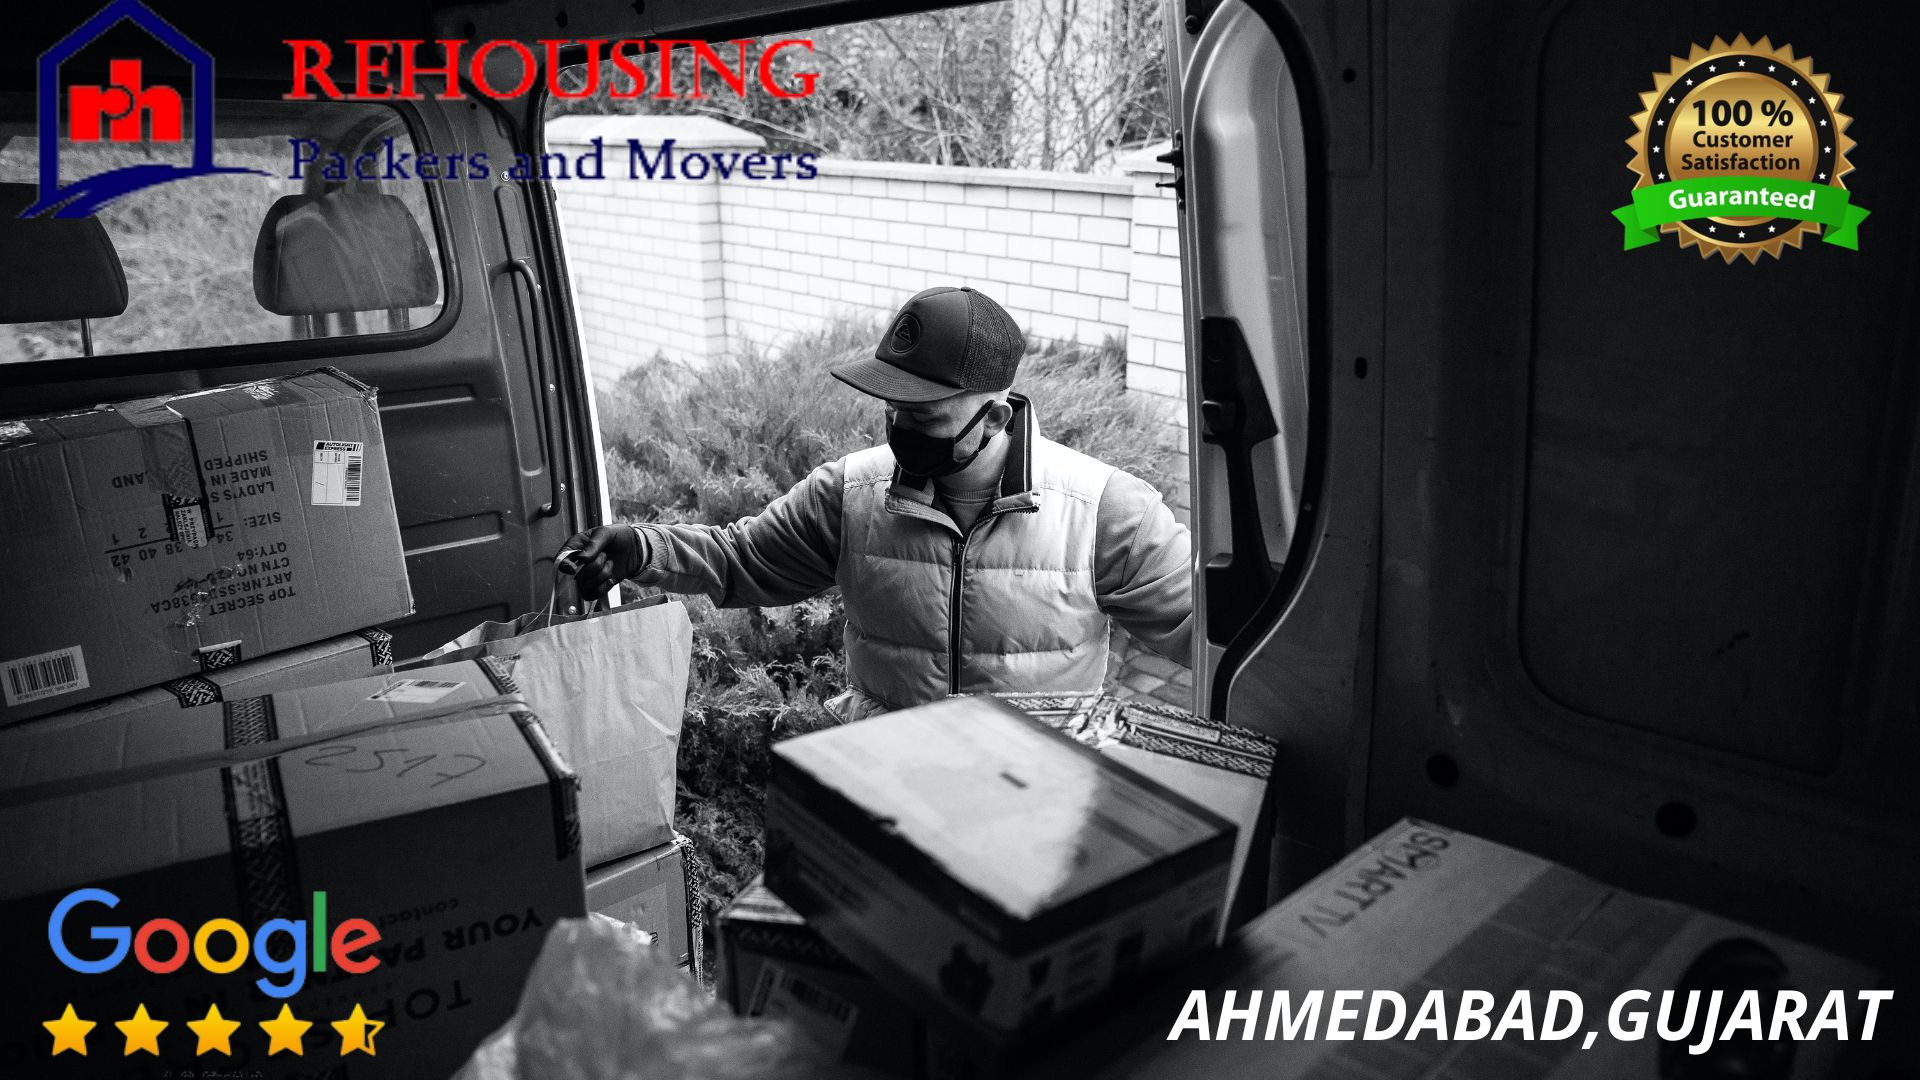 Packers and Movers from Ahmedabad to Bangalore